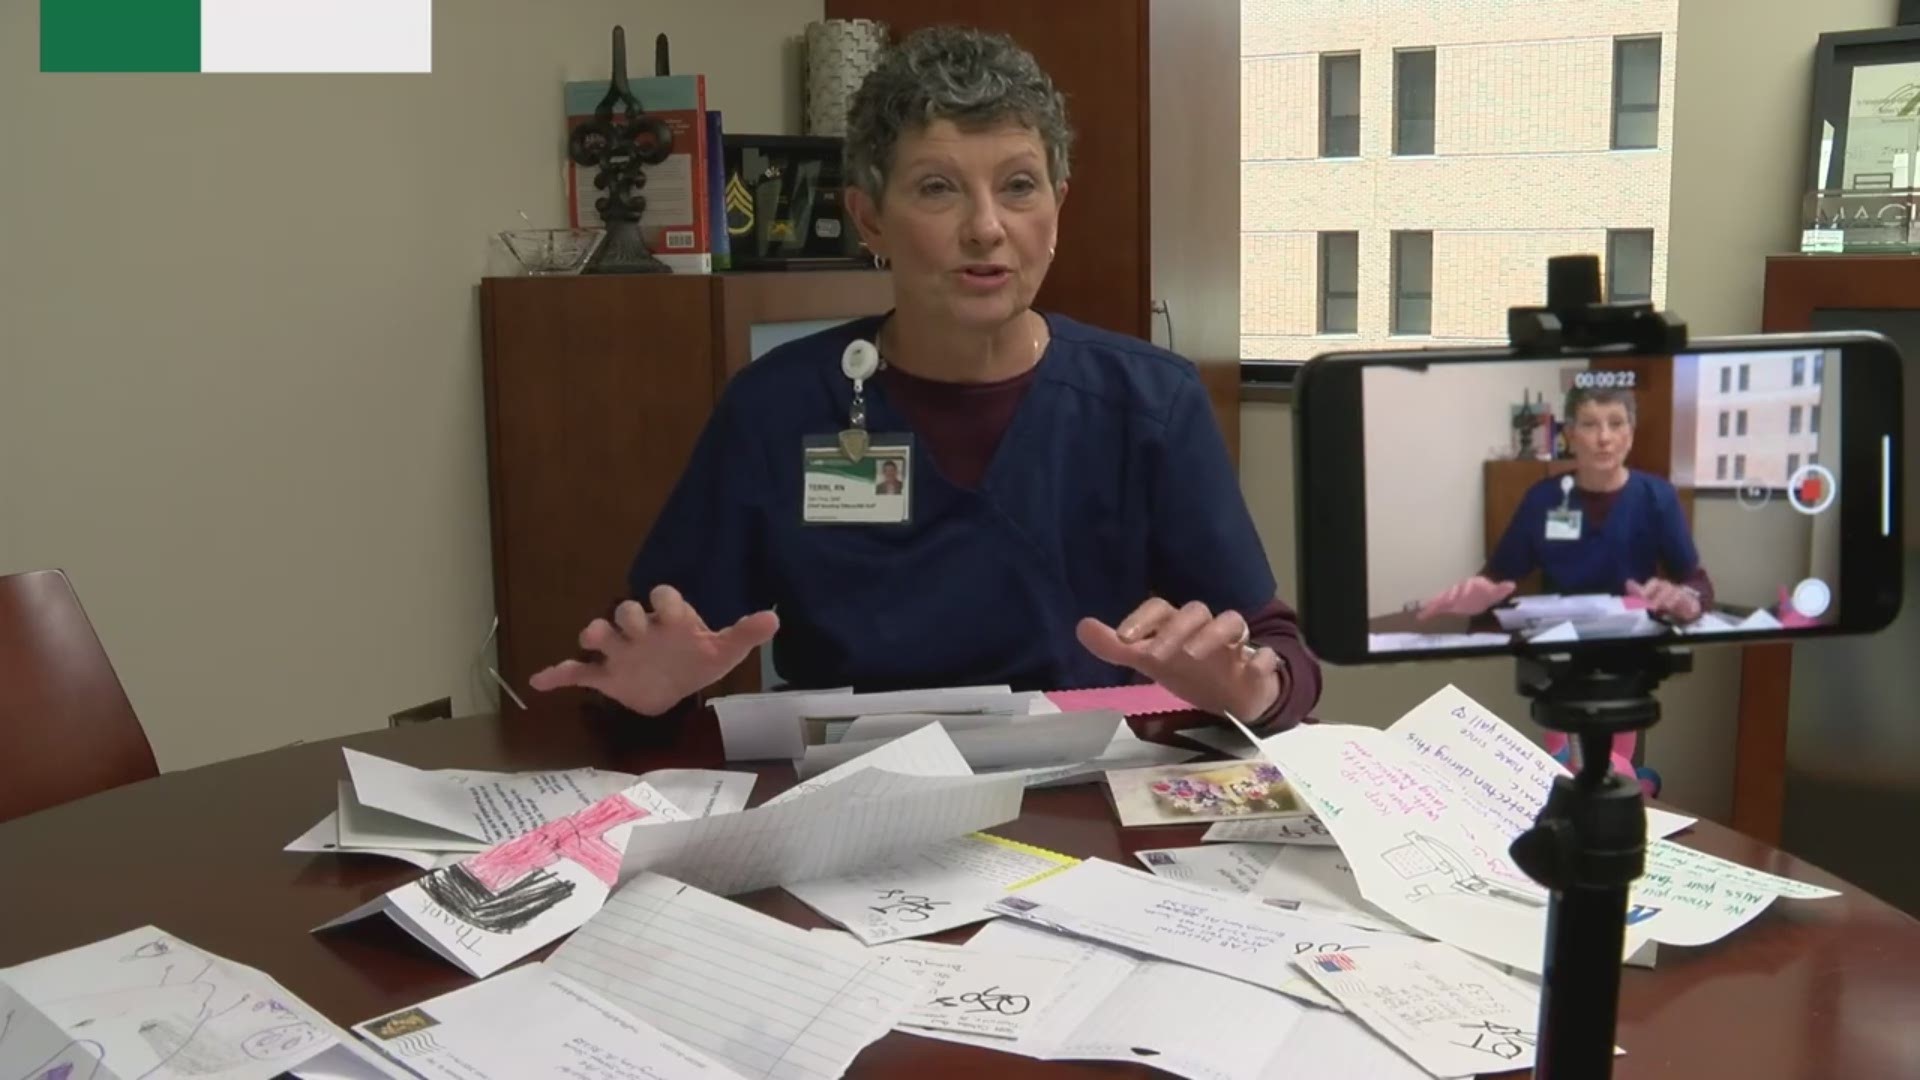 UAB Hospital’s Chief Nursing Officer Terri Poe, RN share letters and notes of support from children of the Birmingham area.